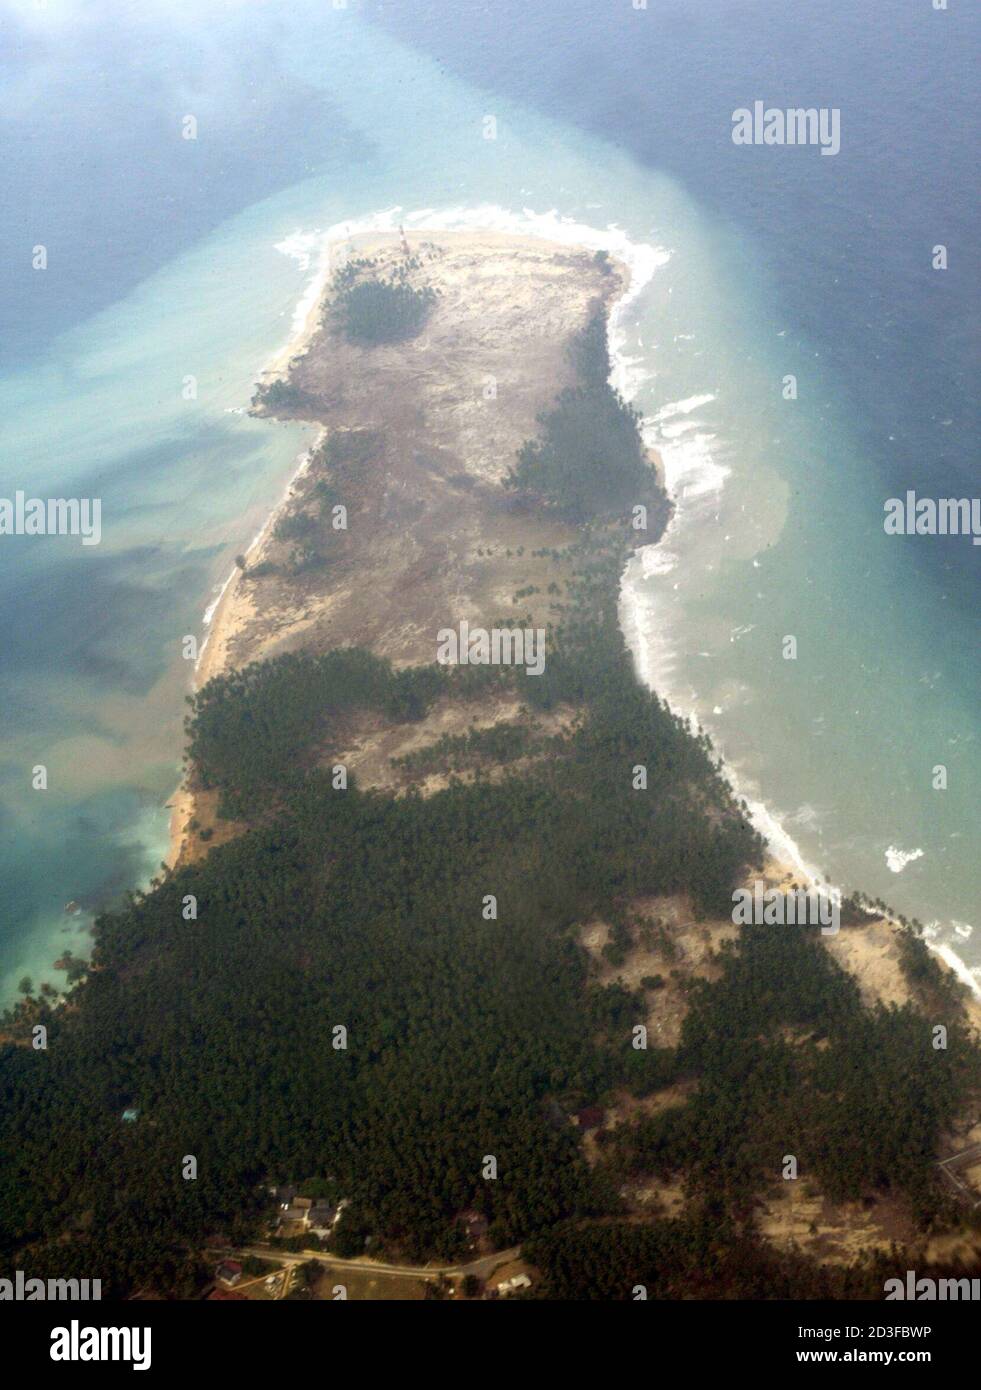 An aerial view of the eroded shore line at Hut Bay on the Little Andaman island in India's tsunami hit remote Andaman and Nicobar archipelago, January 2, 2005. India raised the number of people killed or feared killed in last week's tsunami to 14,488 on Sunday, up by more than 1,700 since the previous evening's estimate. REUTERS/Altaf Hussain  AH/GB Stock Photo